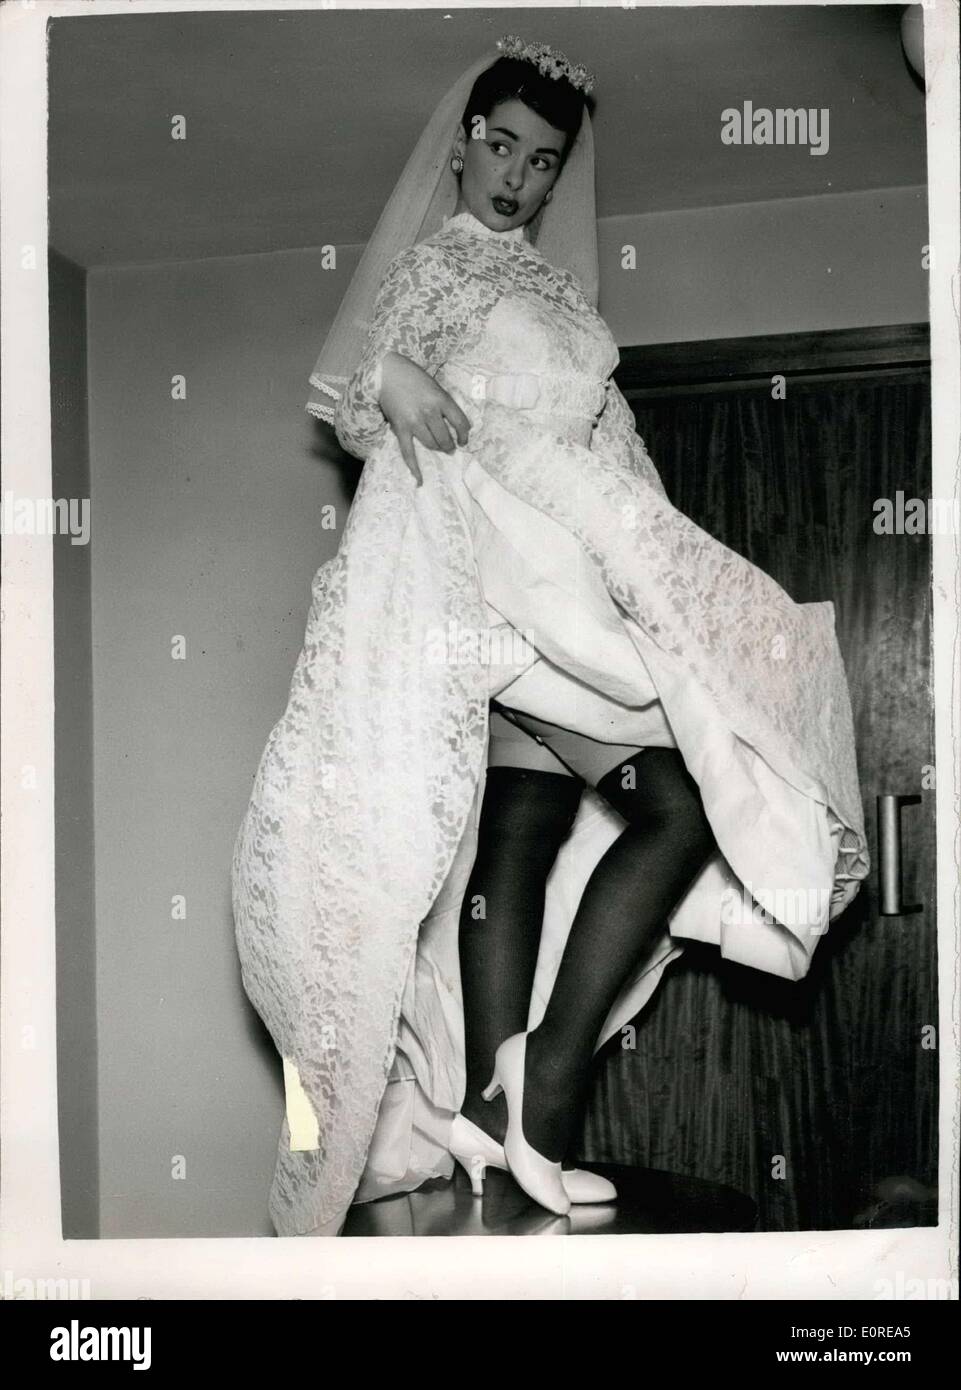 Feb. 17, 1959 - Wedding Gowns Many Countries In Show In London Model Wears  Black Woolen Tights: Wedding gowns of many countries Stock Photo - Alamy